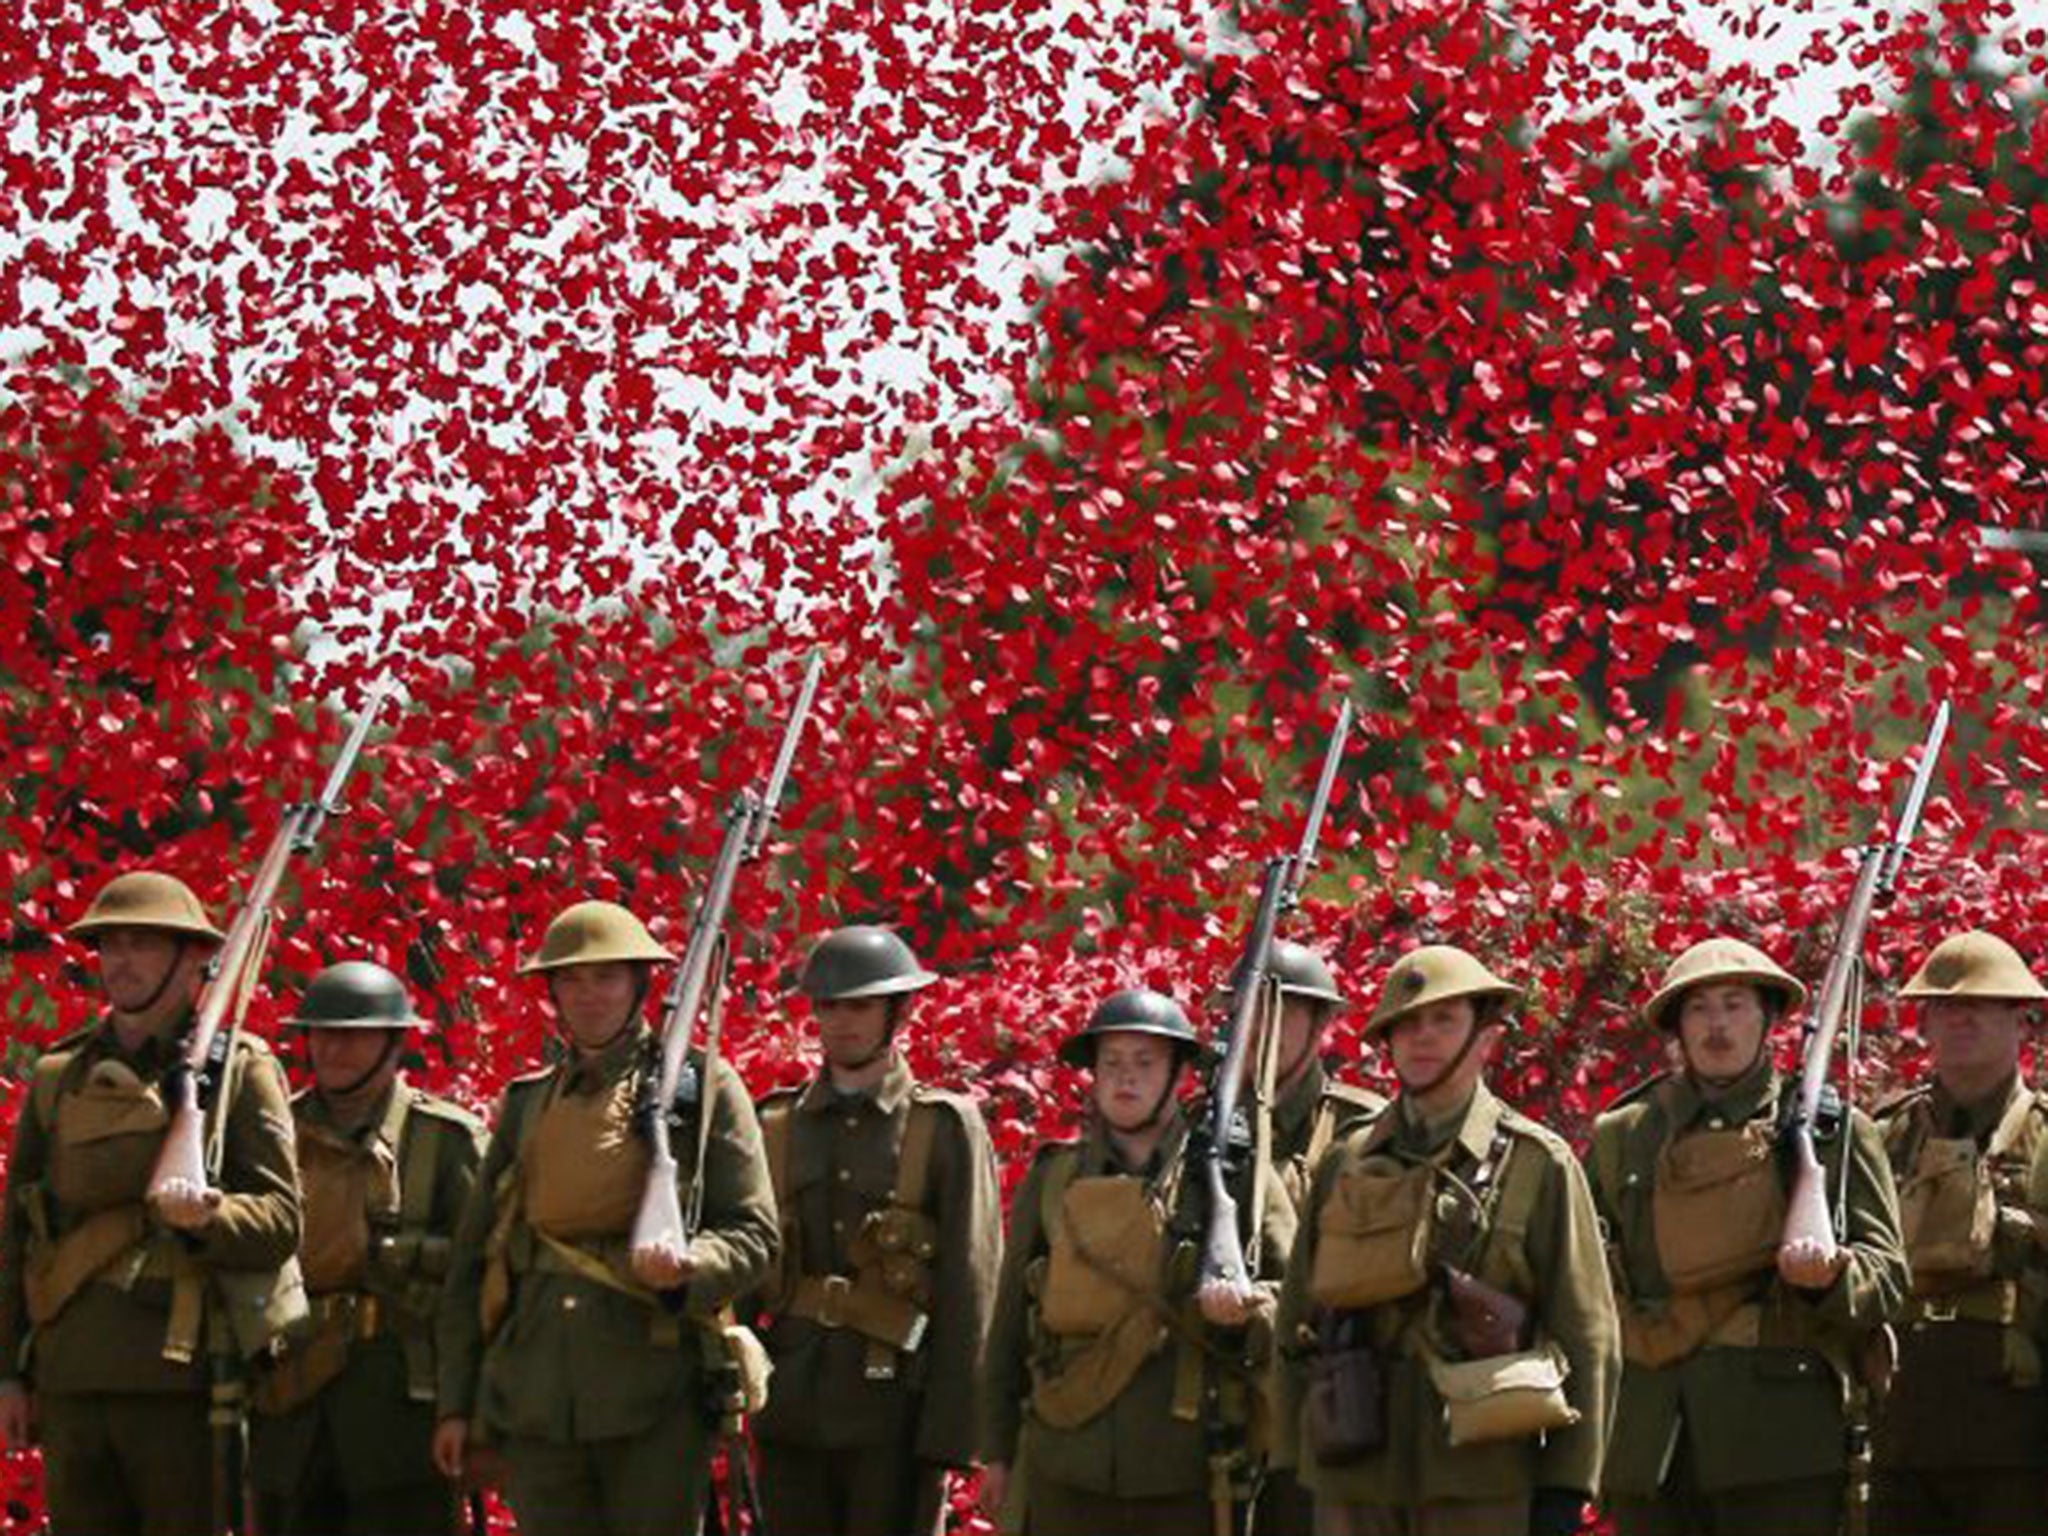 Members of the Great War Society in Bovington are showered with poppies during the day's commemorations